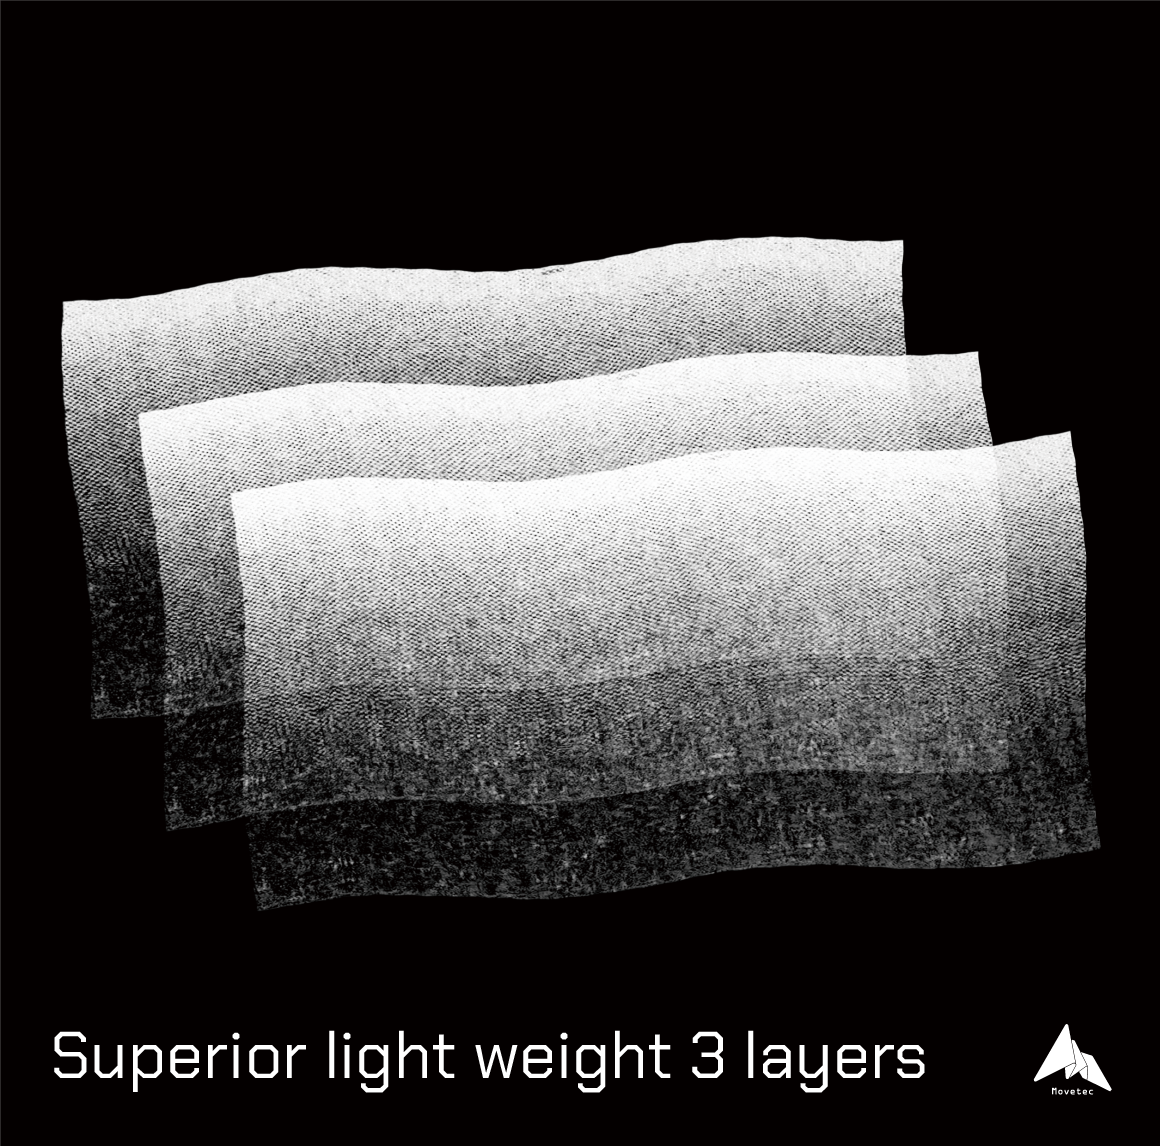 Superior light weight 3 layers